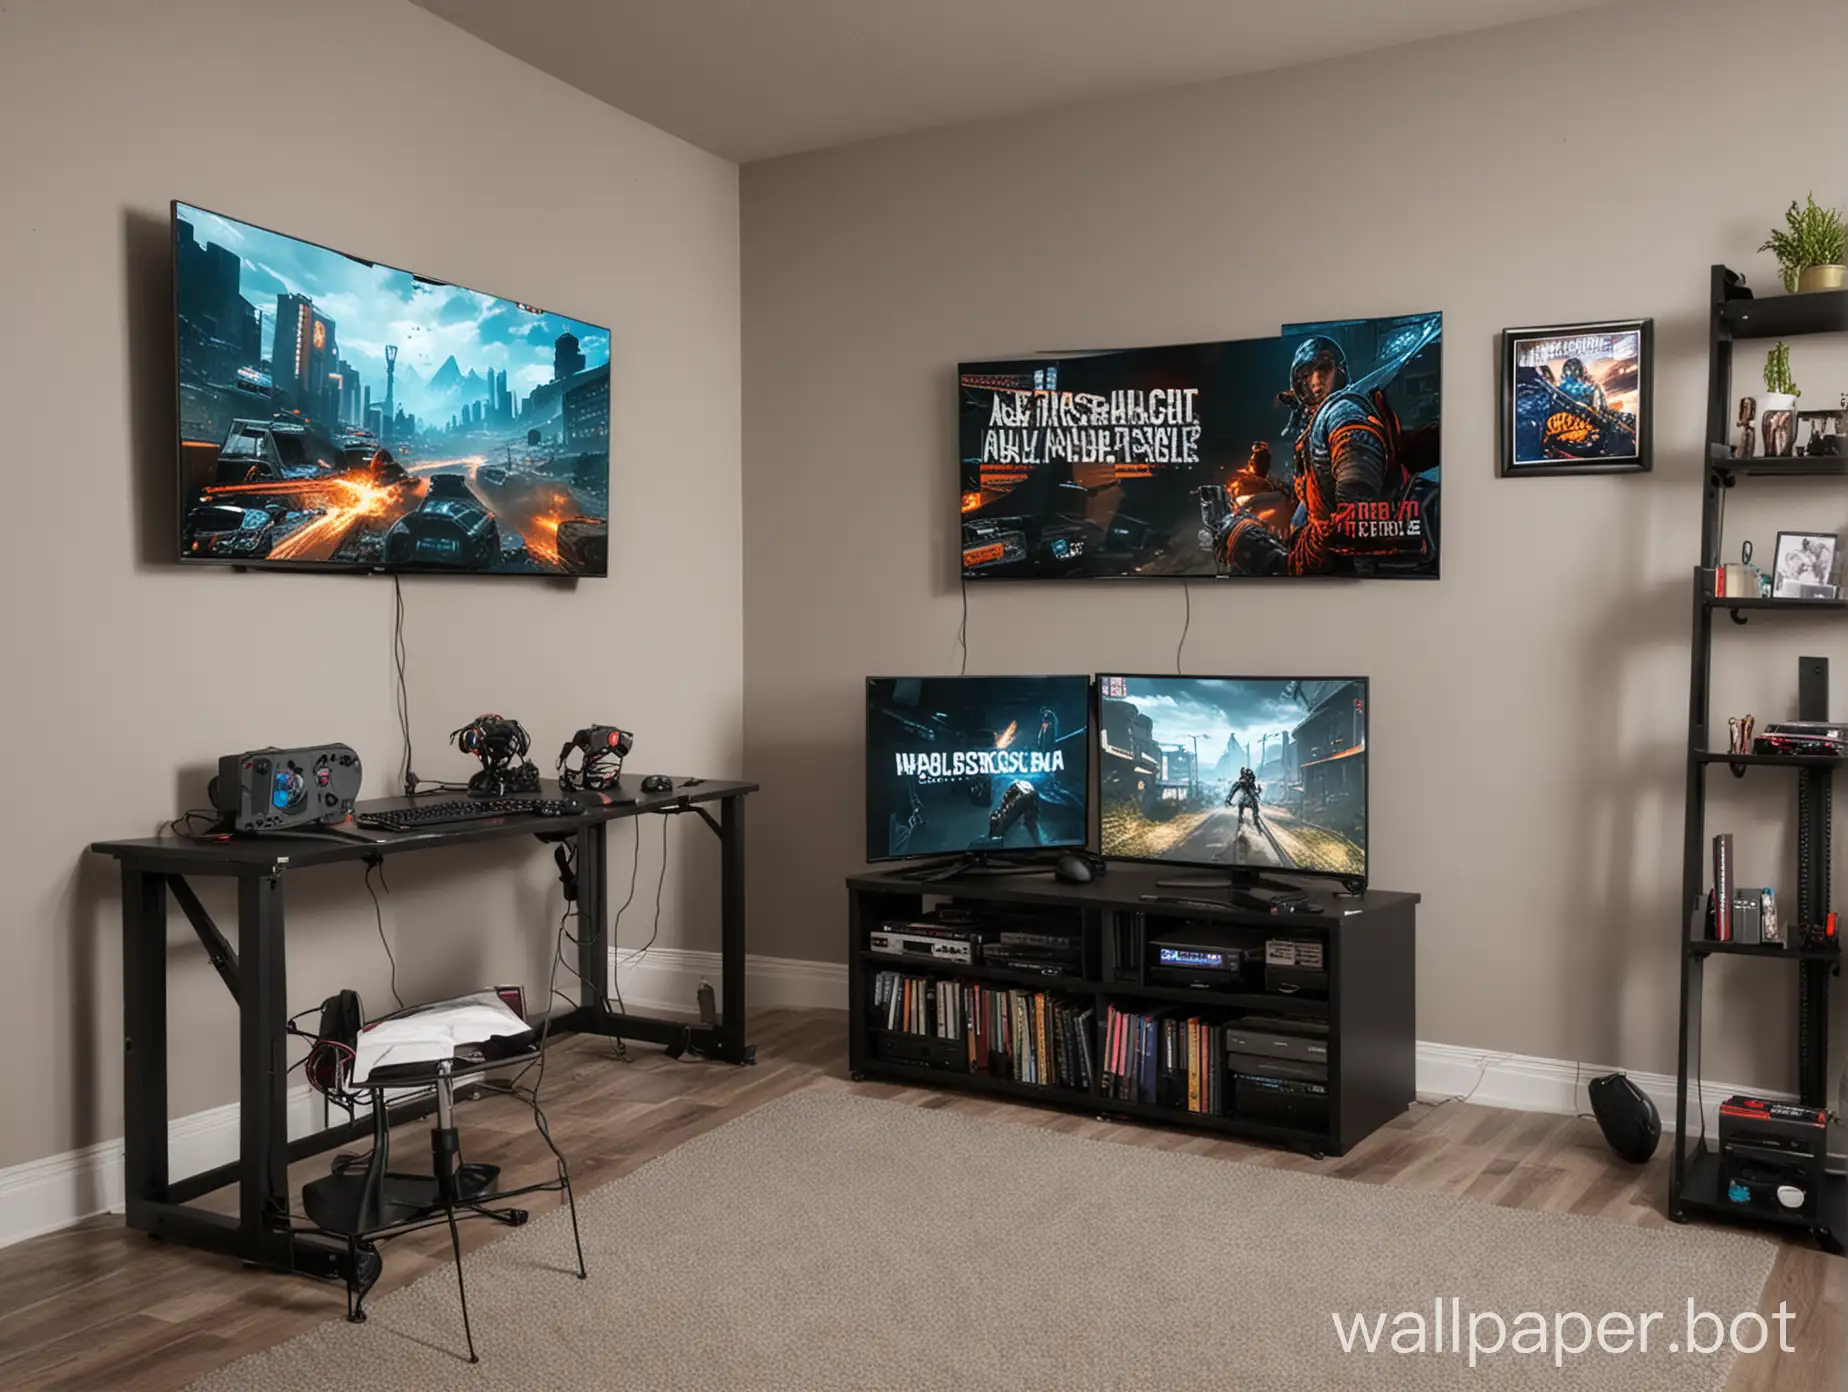 a gaming setup in a room